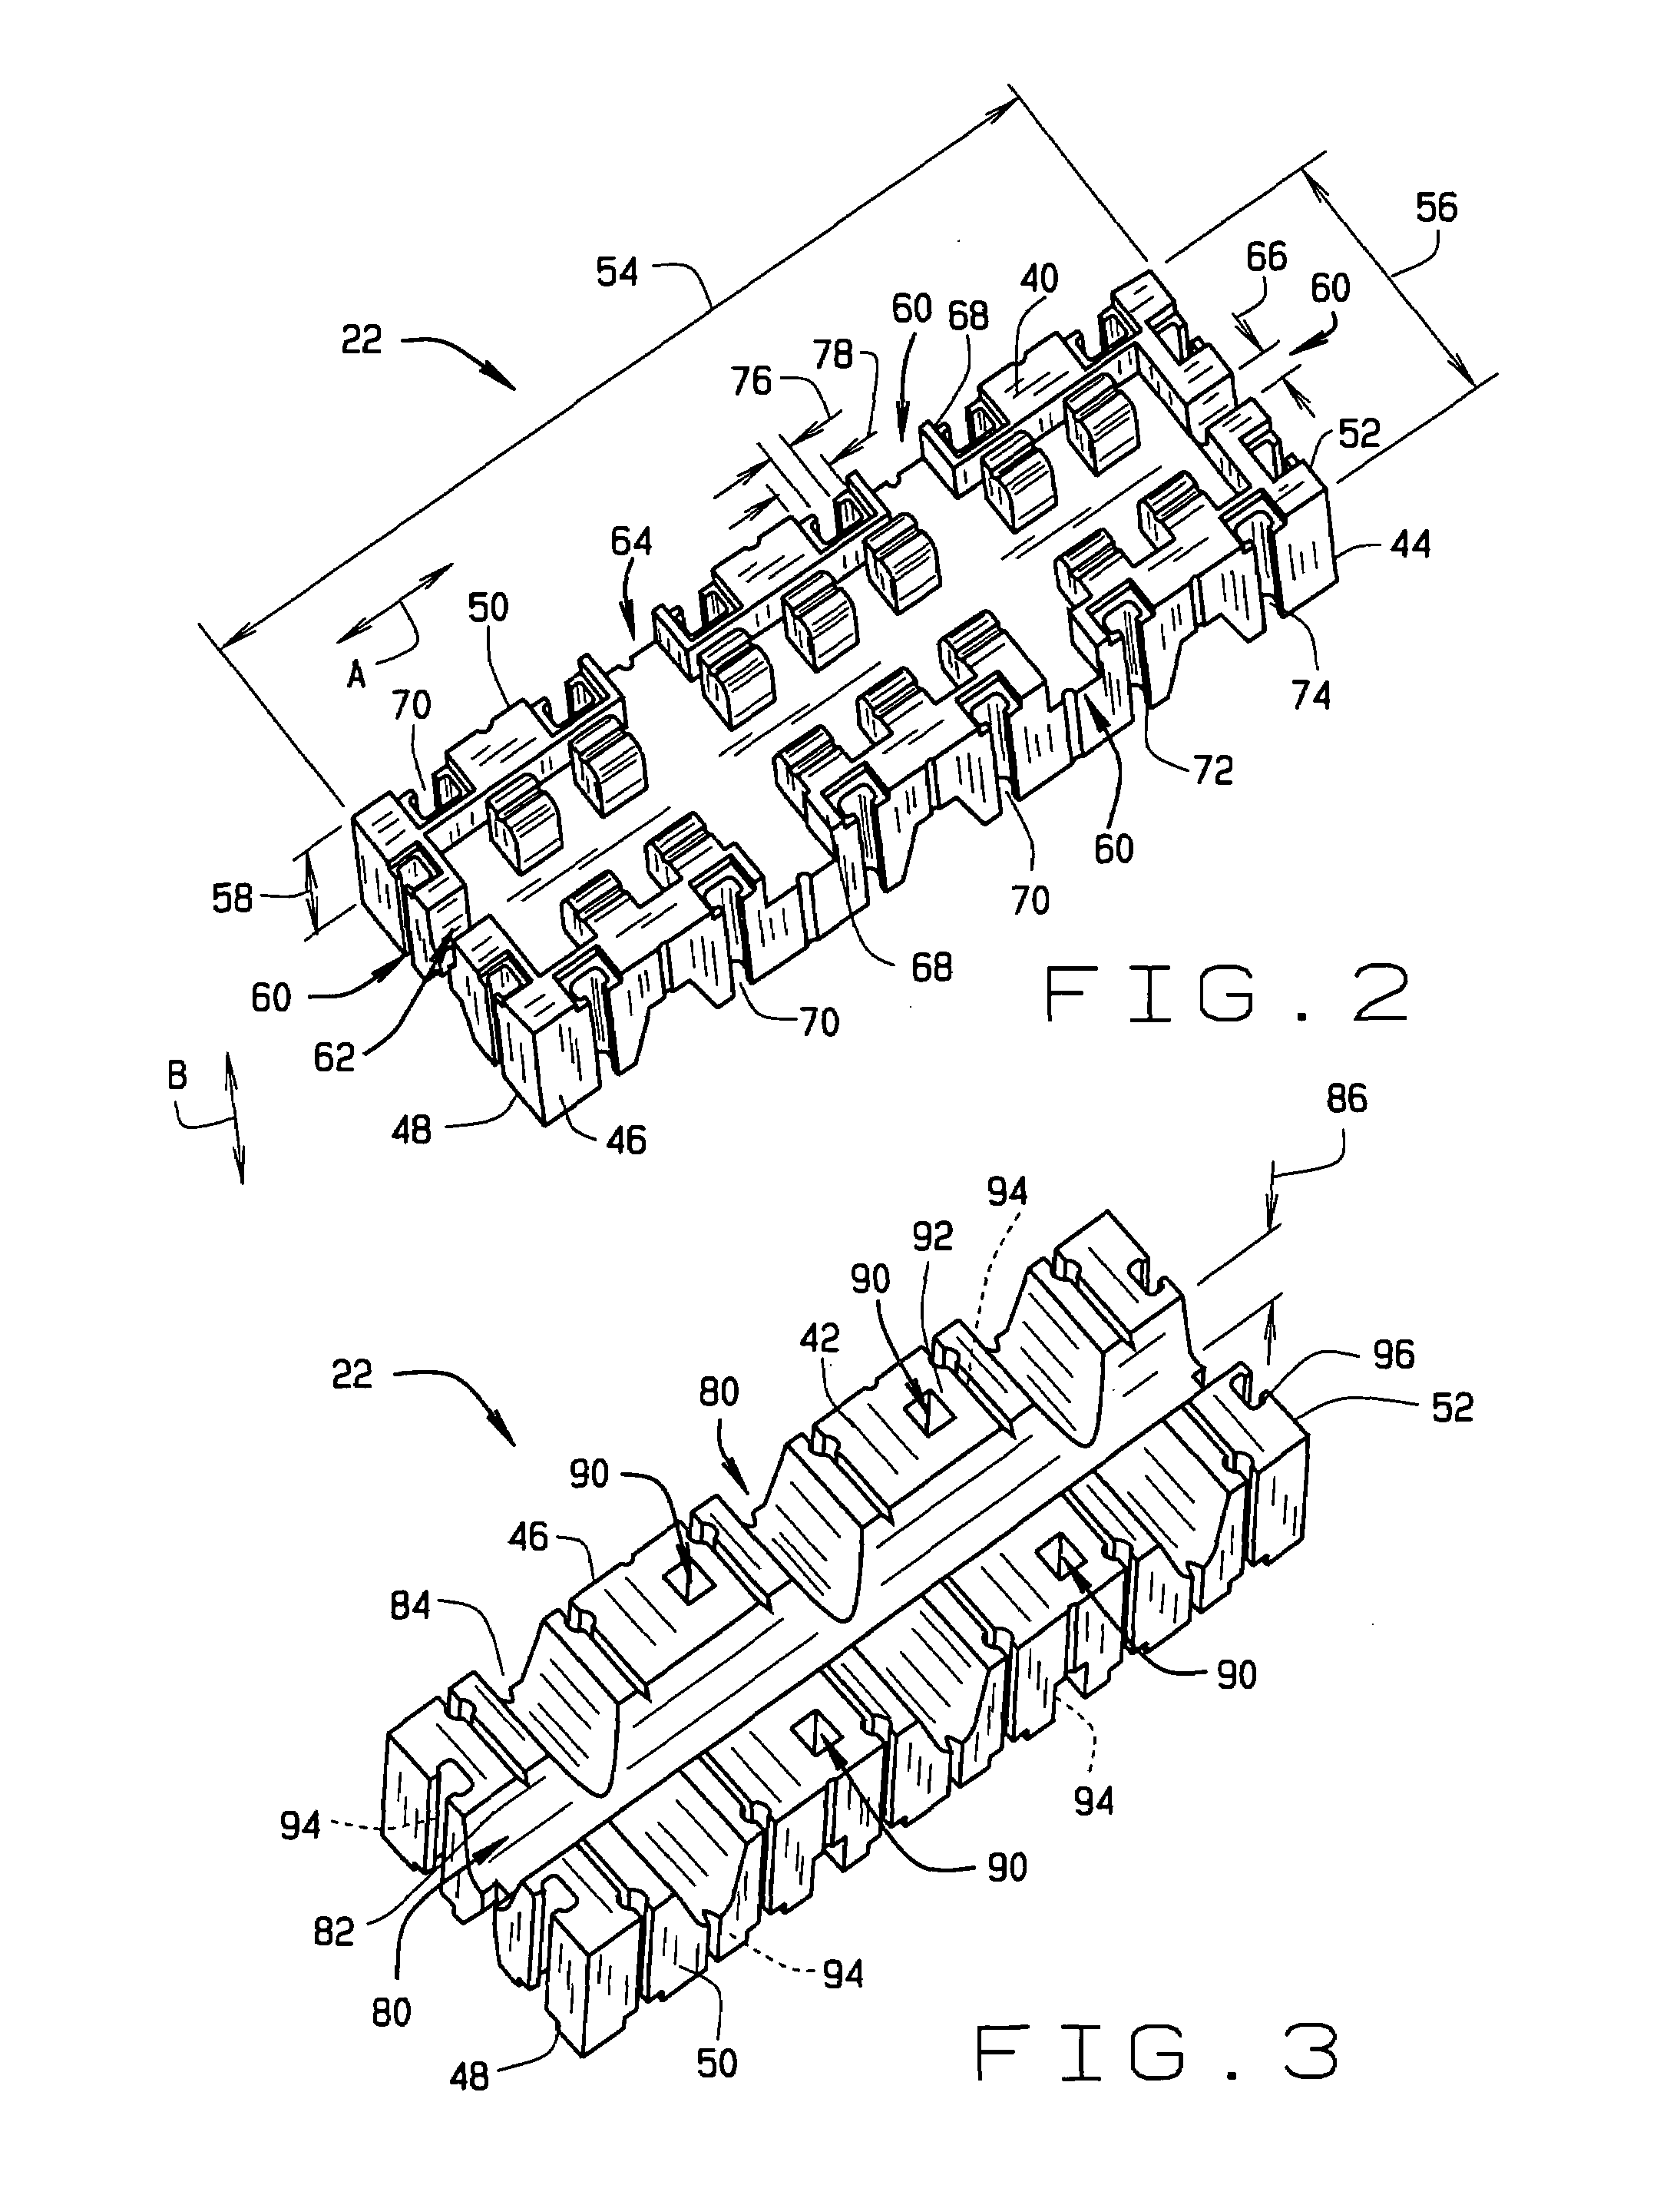 Methods and apparatus for assembling docks